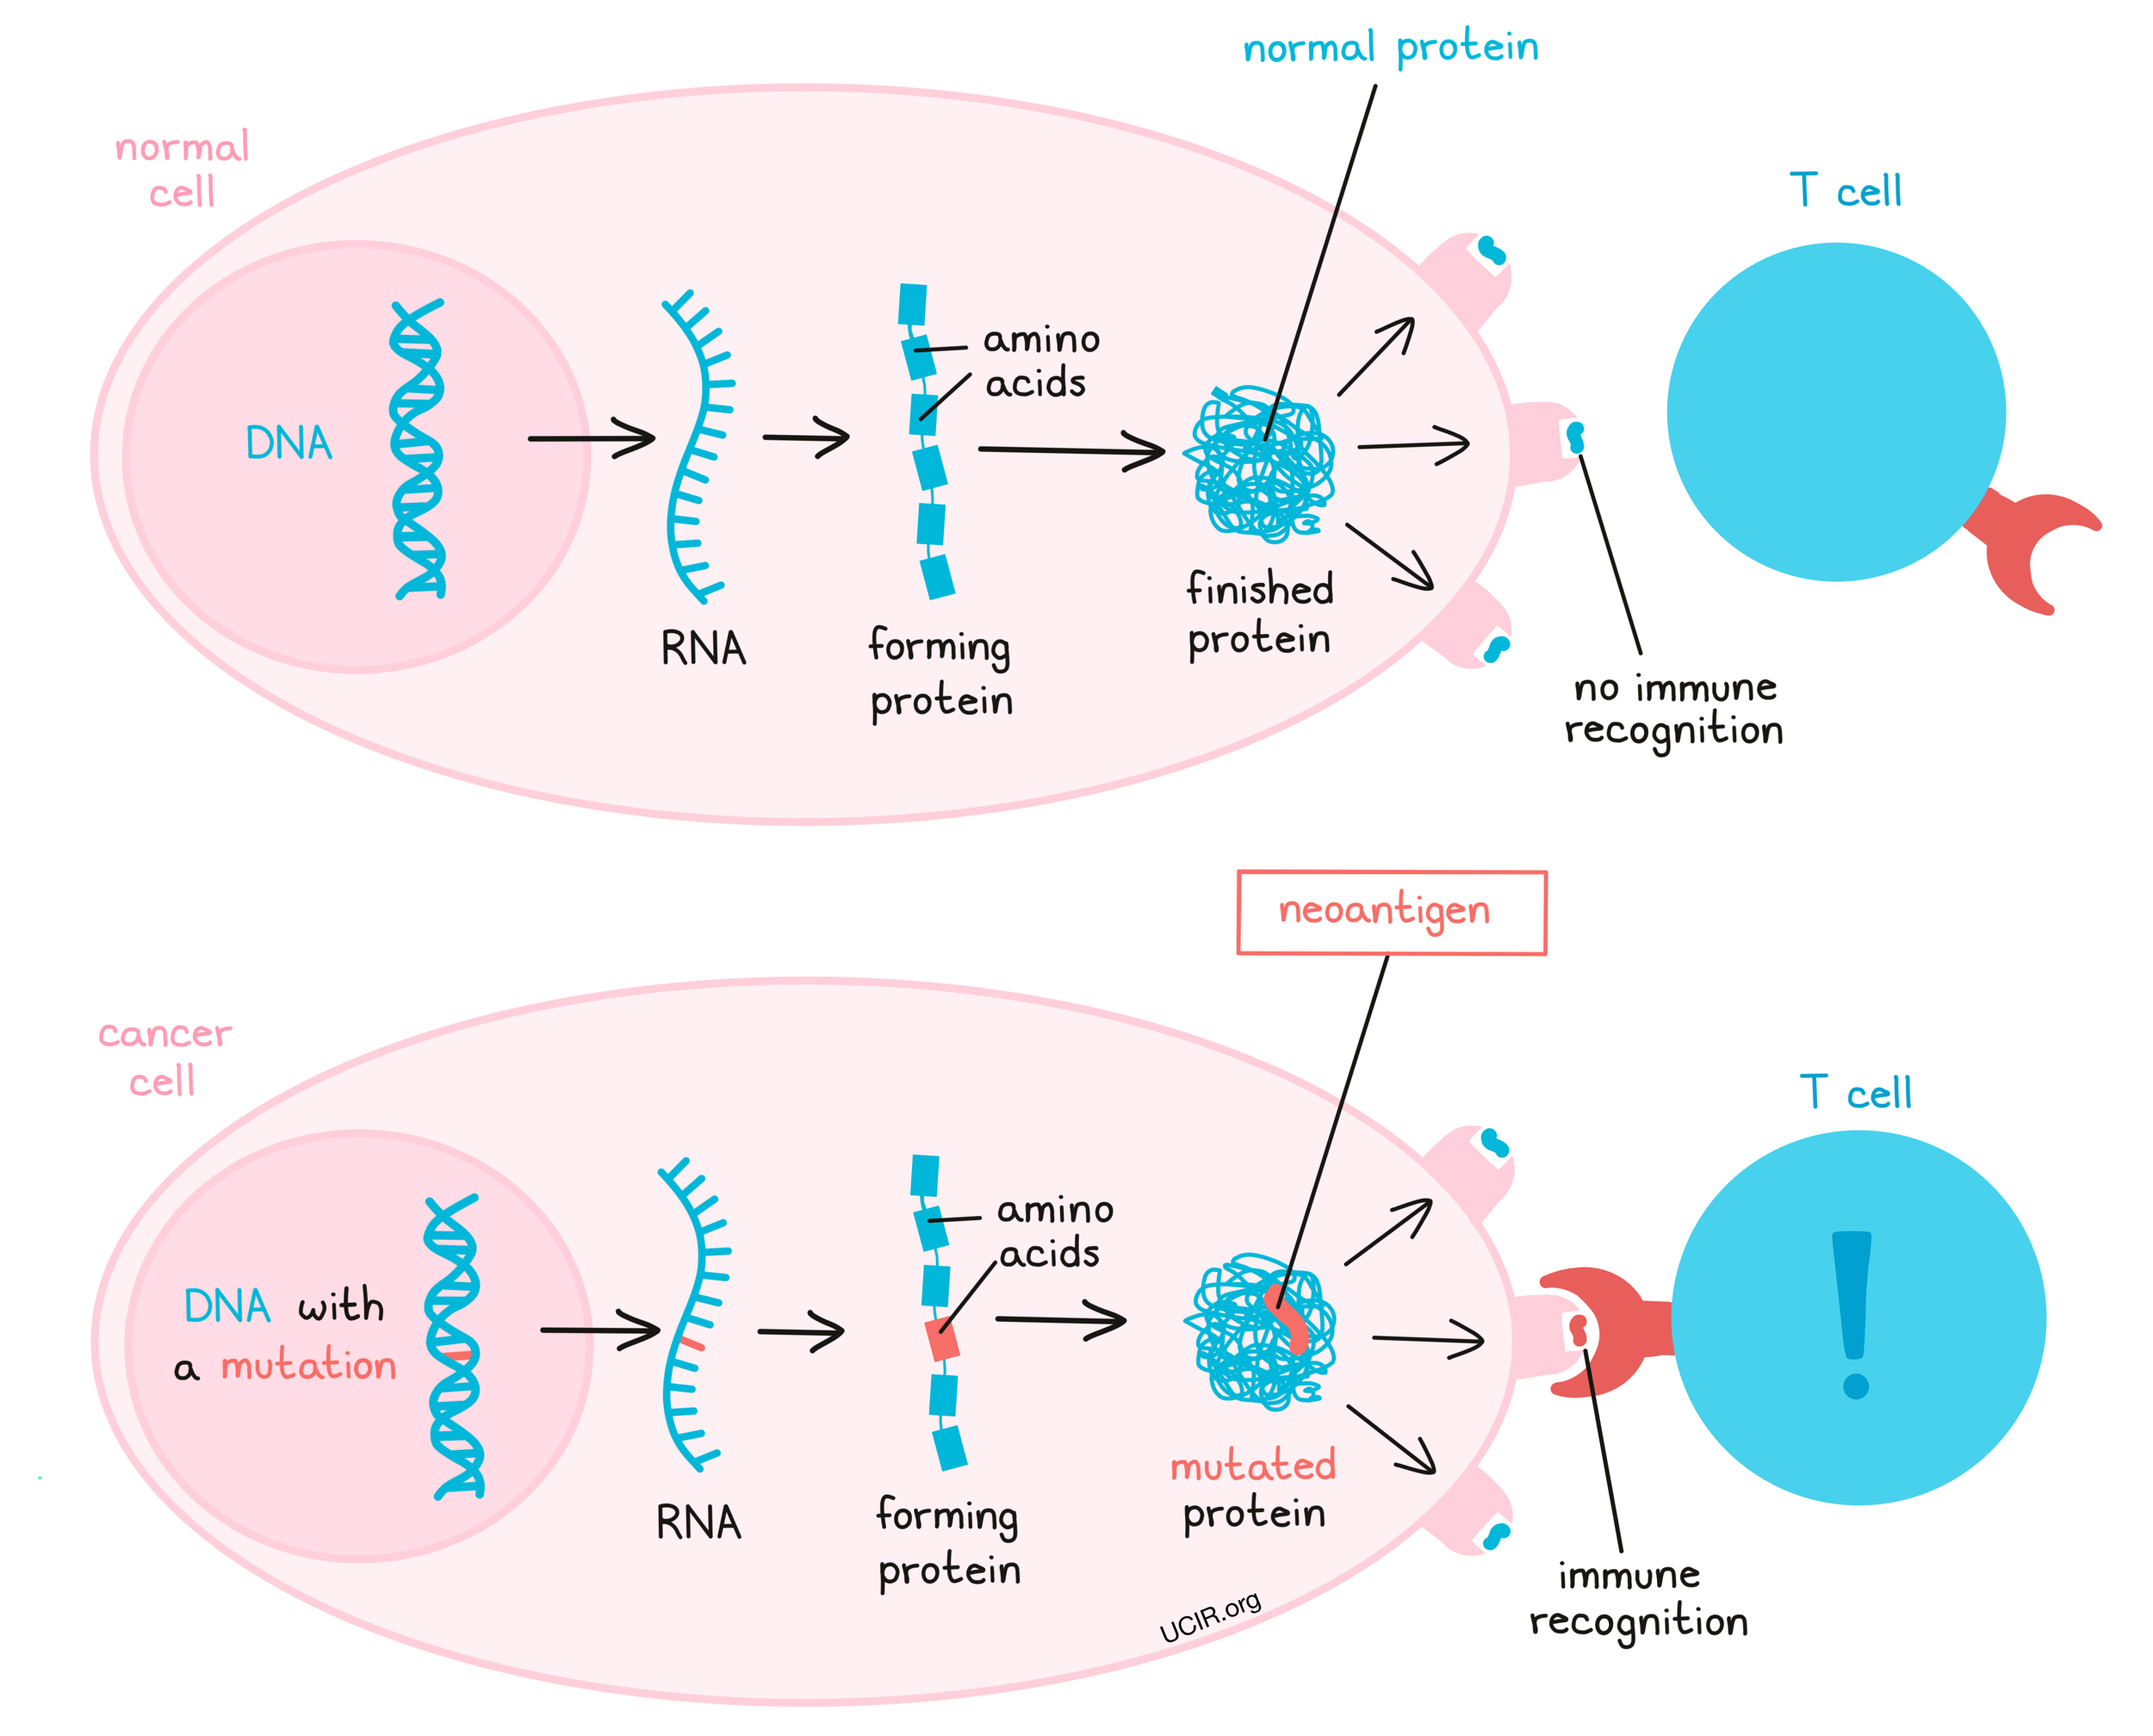 Neoantigens are antigens that arise when a mutation in the DNA of cancer cells